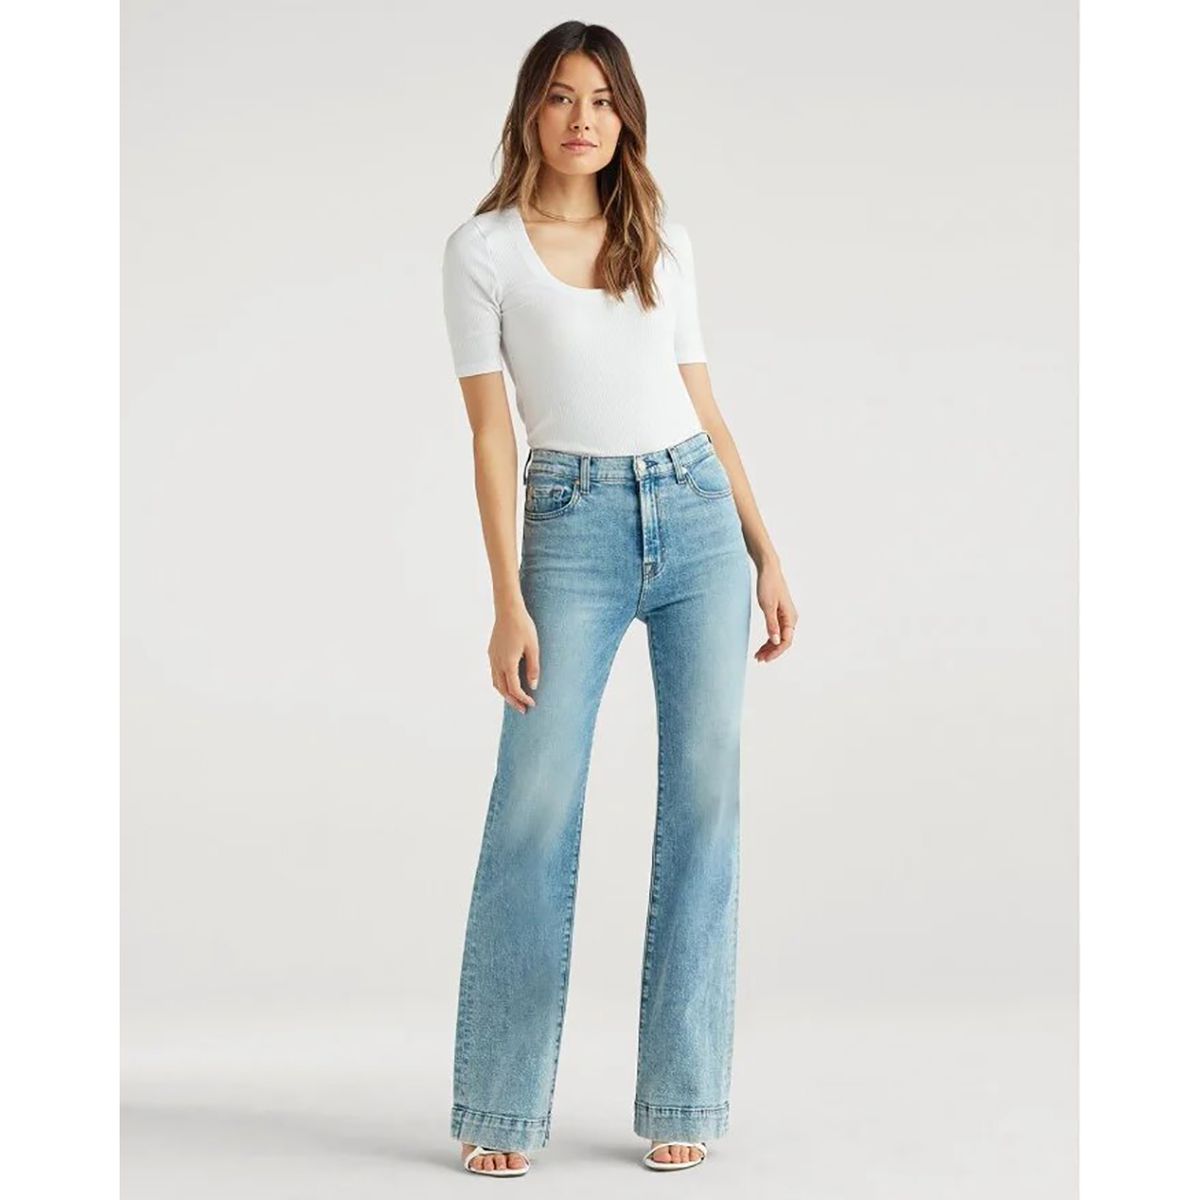 7 For All Mankind Is Having a Summer Sale on Jeans | InStyle